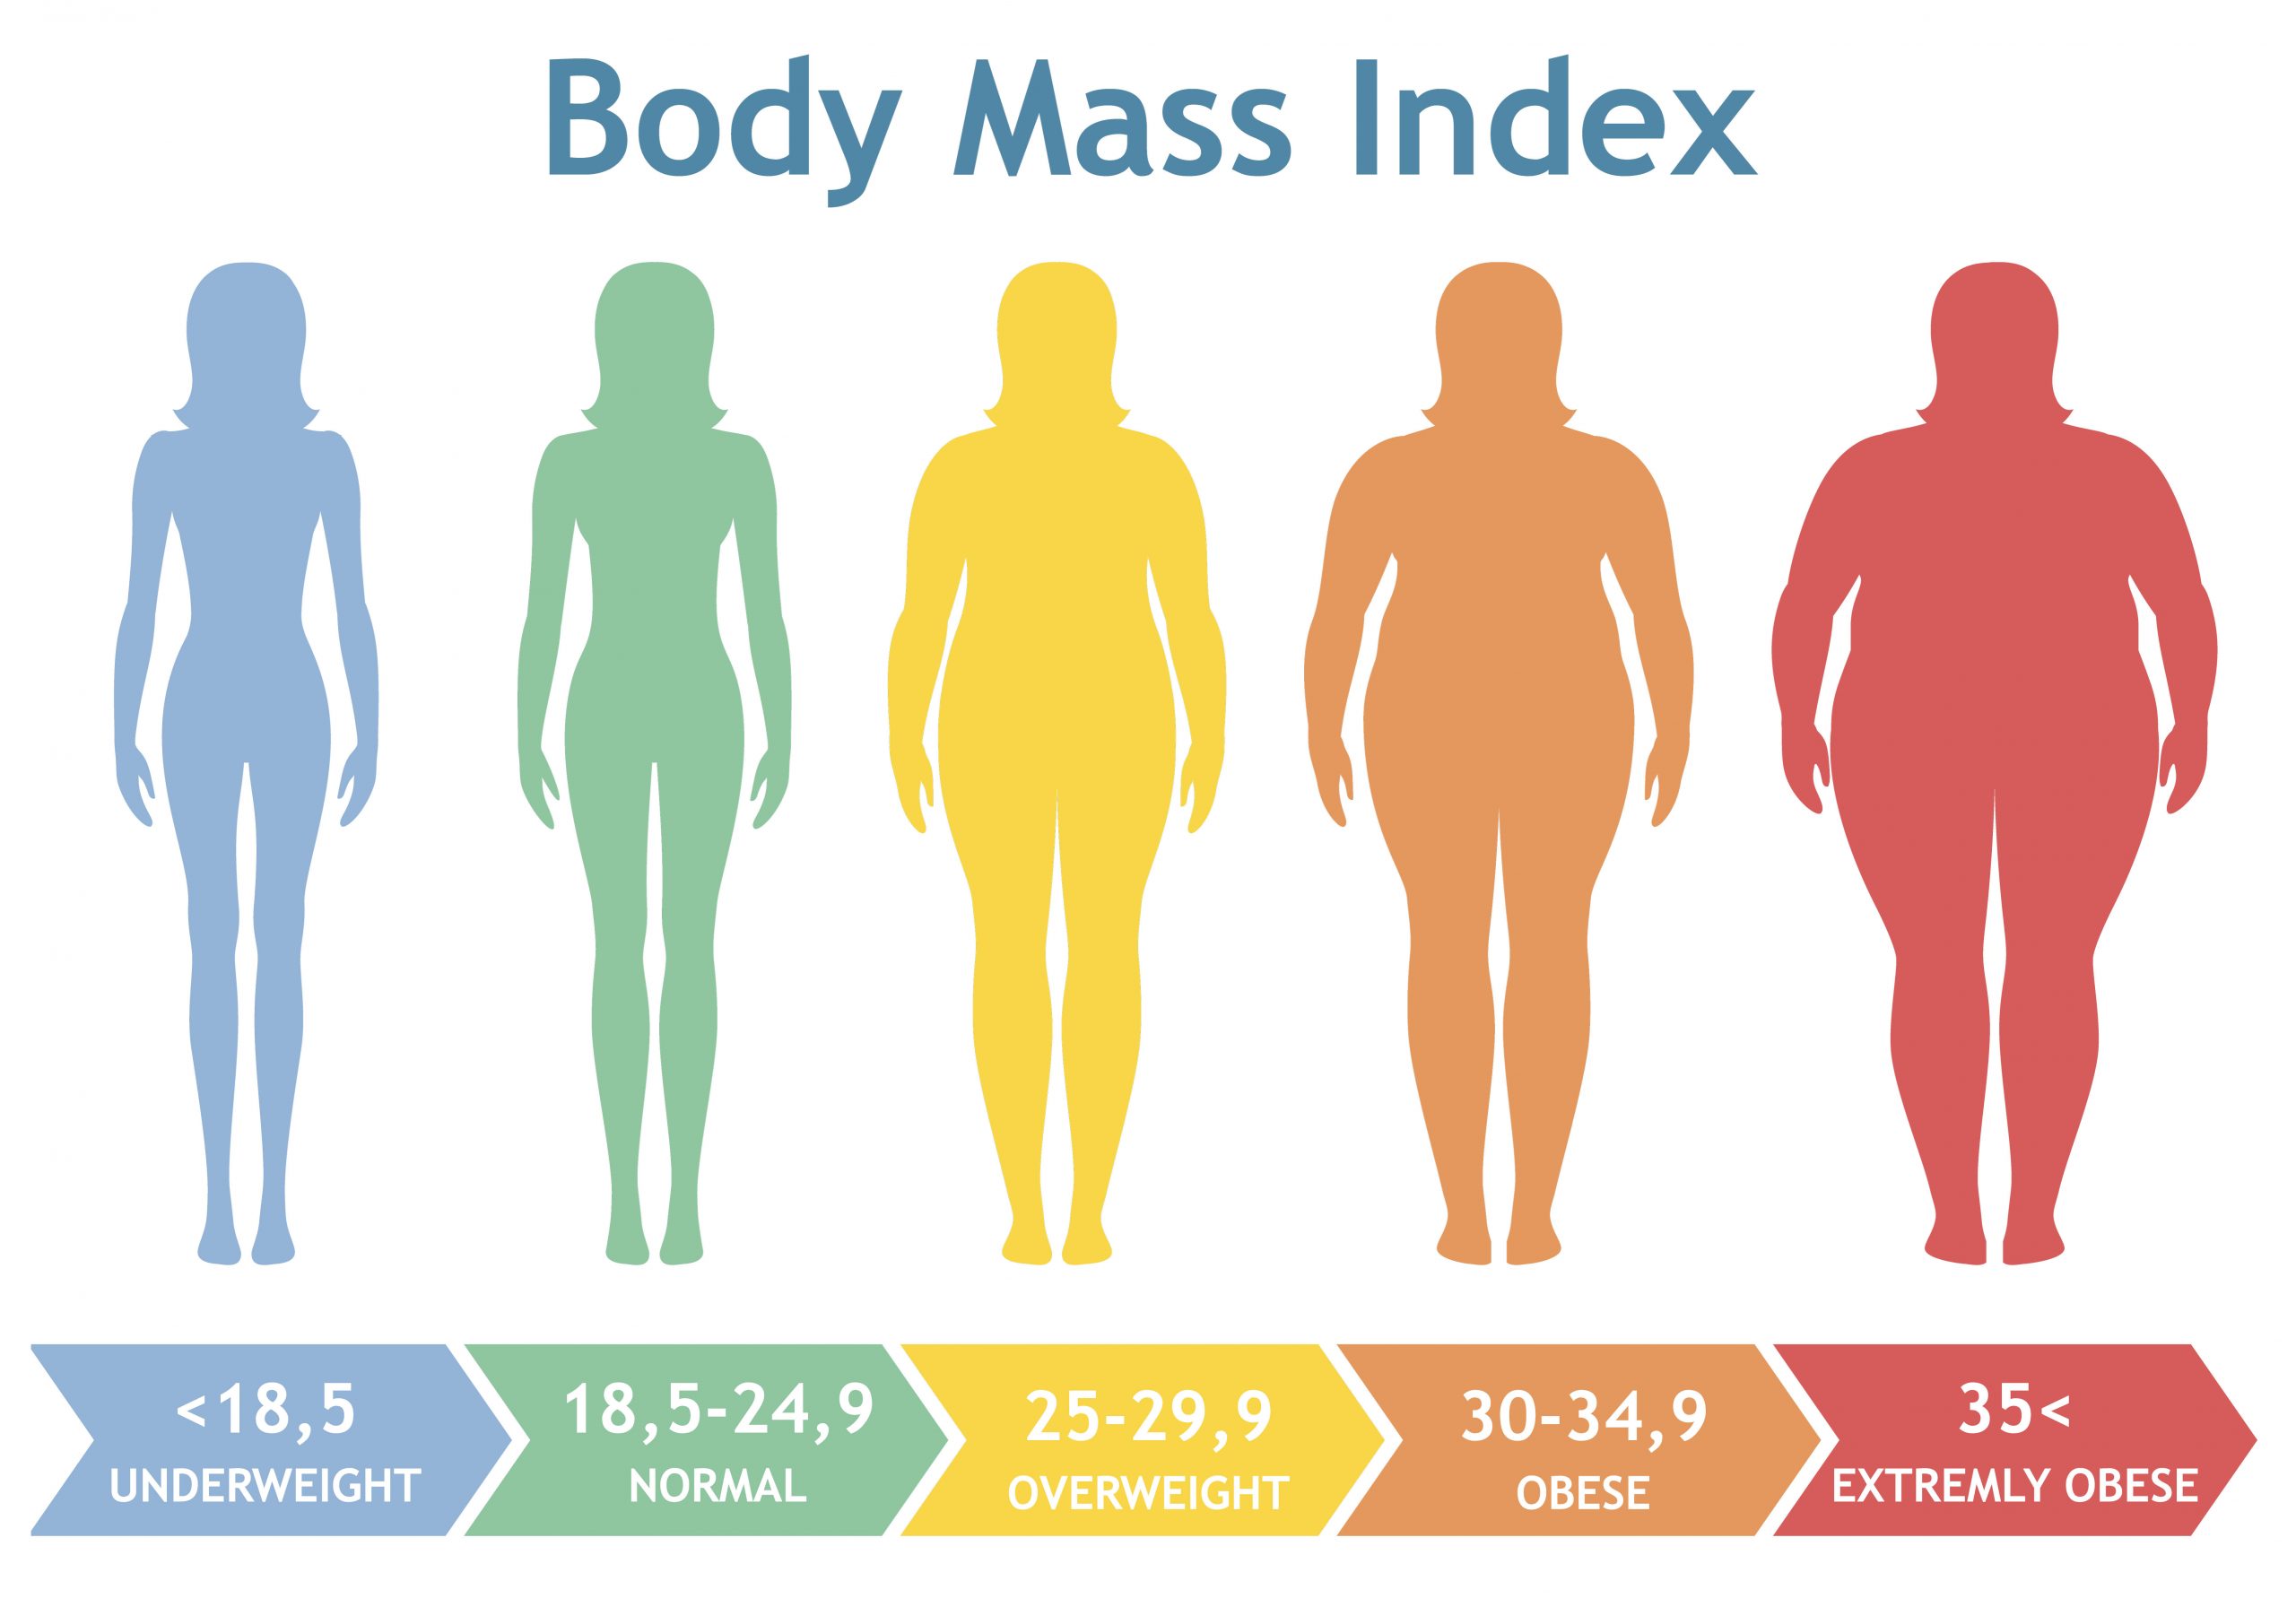 Obesity linked with higher risk for COVID19 complications UNC News